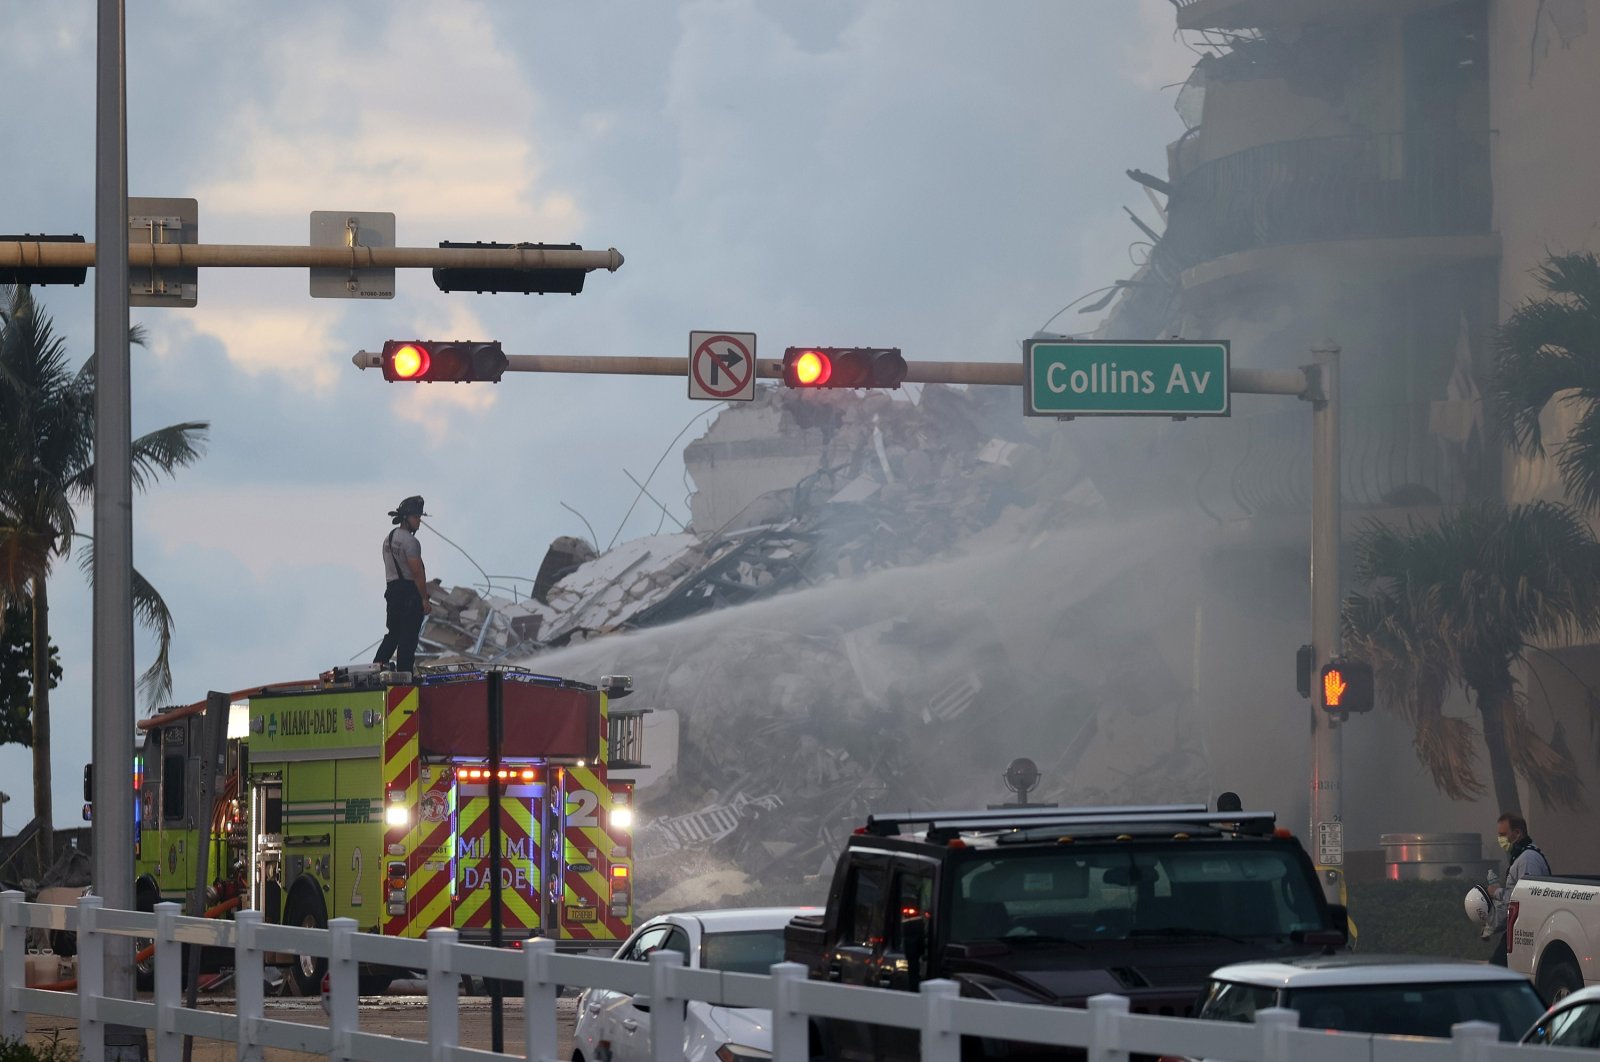 Miami-Dade Fire Rescue personnel spray water on a fire in the partially collapsed 12-story Champlain Towers South condo building as search and rescue operations continue in Surfside, Florida, June 25, 2021. (AFP Photo)